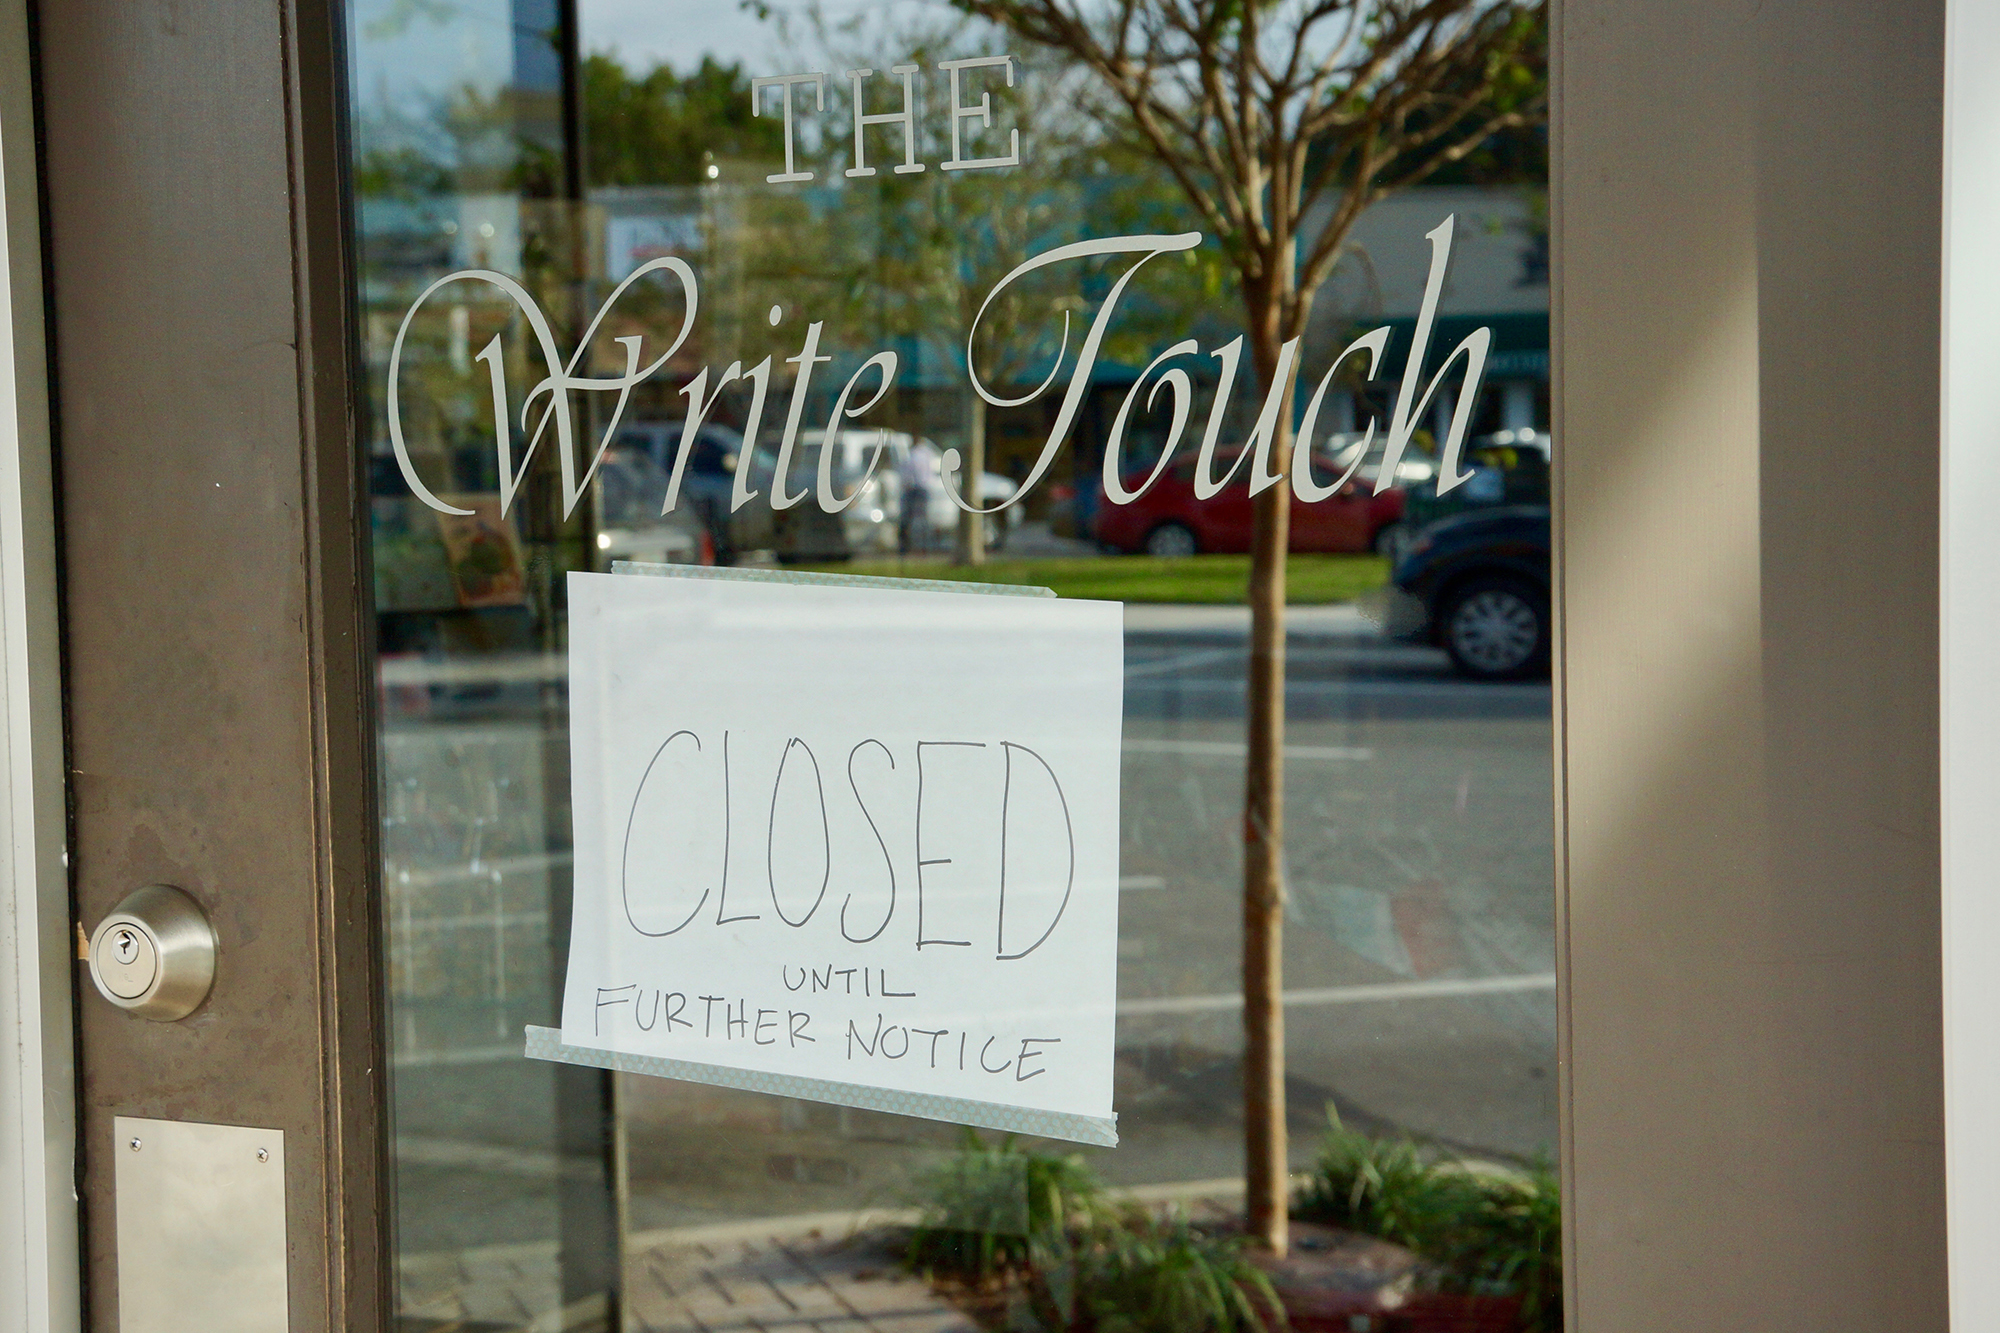 The Write Touch and The Wardroom Ltd. posted signs that they would be closed until further notice.